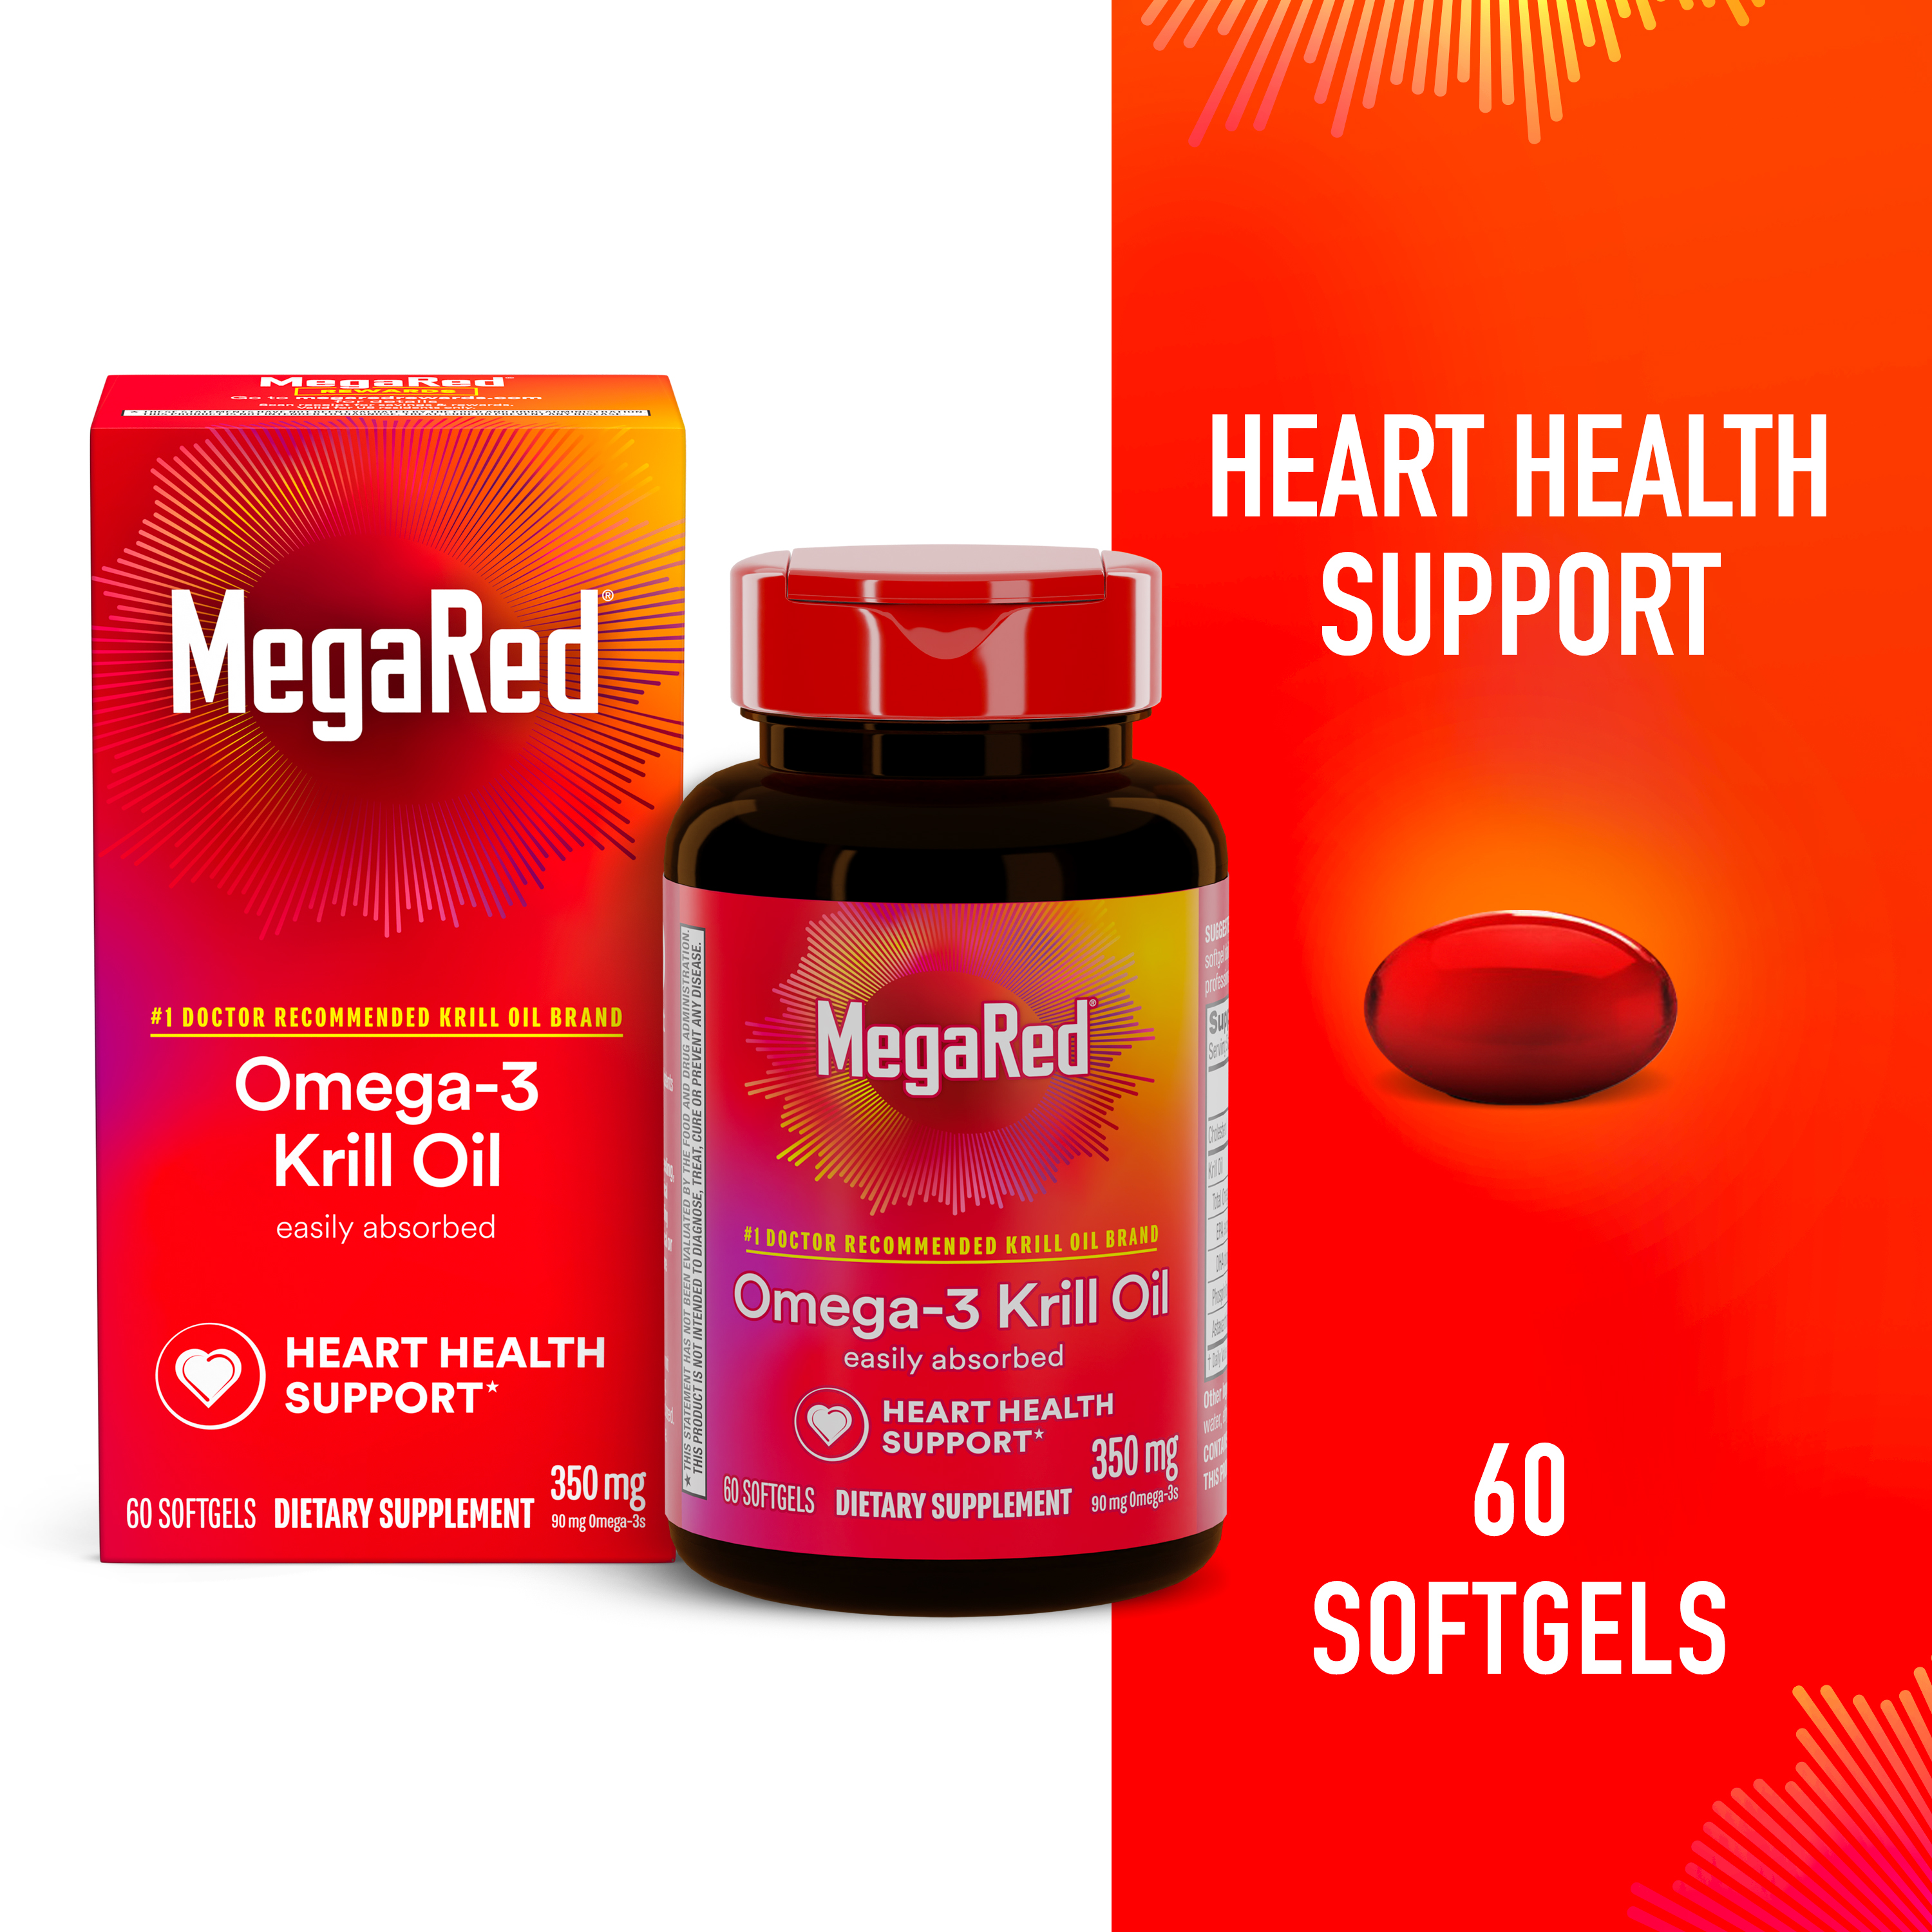 MegaRed 350mg Superior Omega-3s Krill Oil, 60 Softgels - image 1 of 13